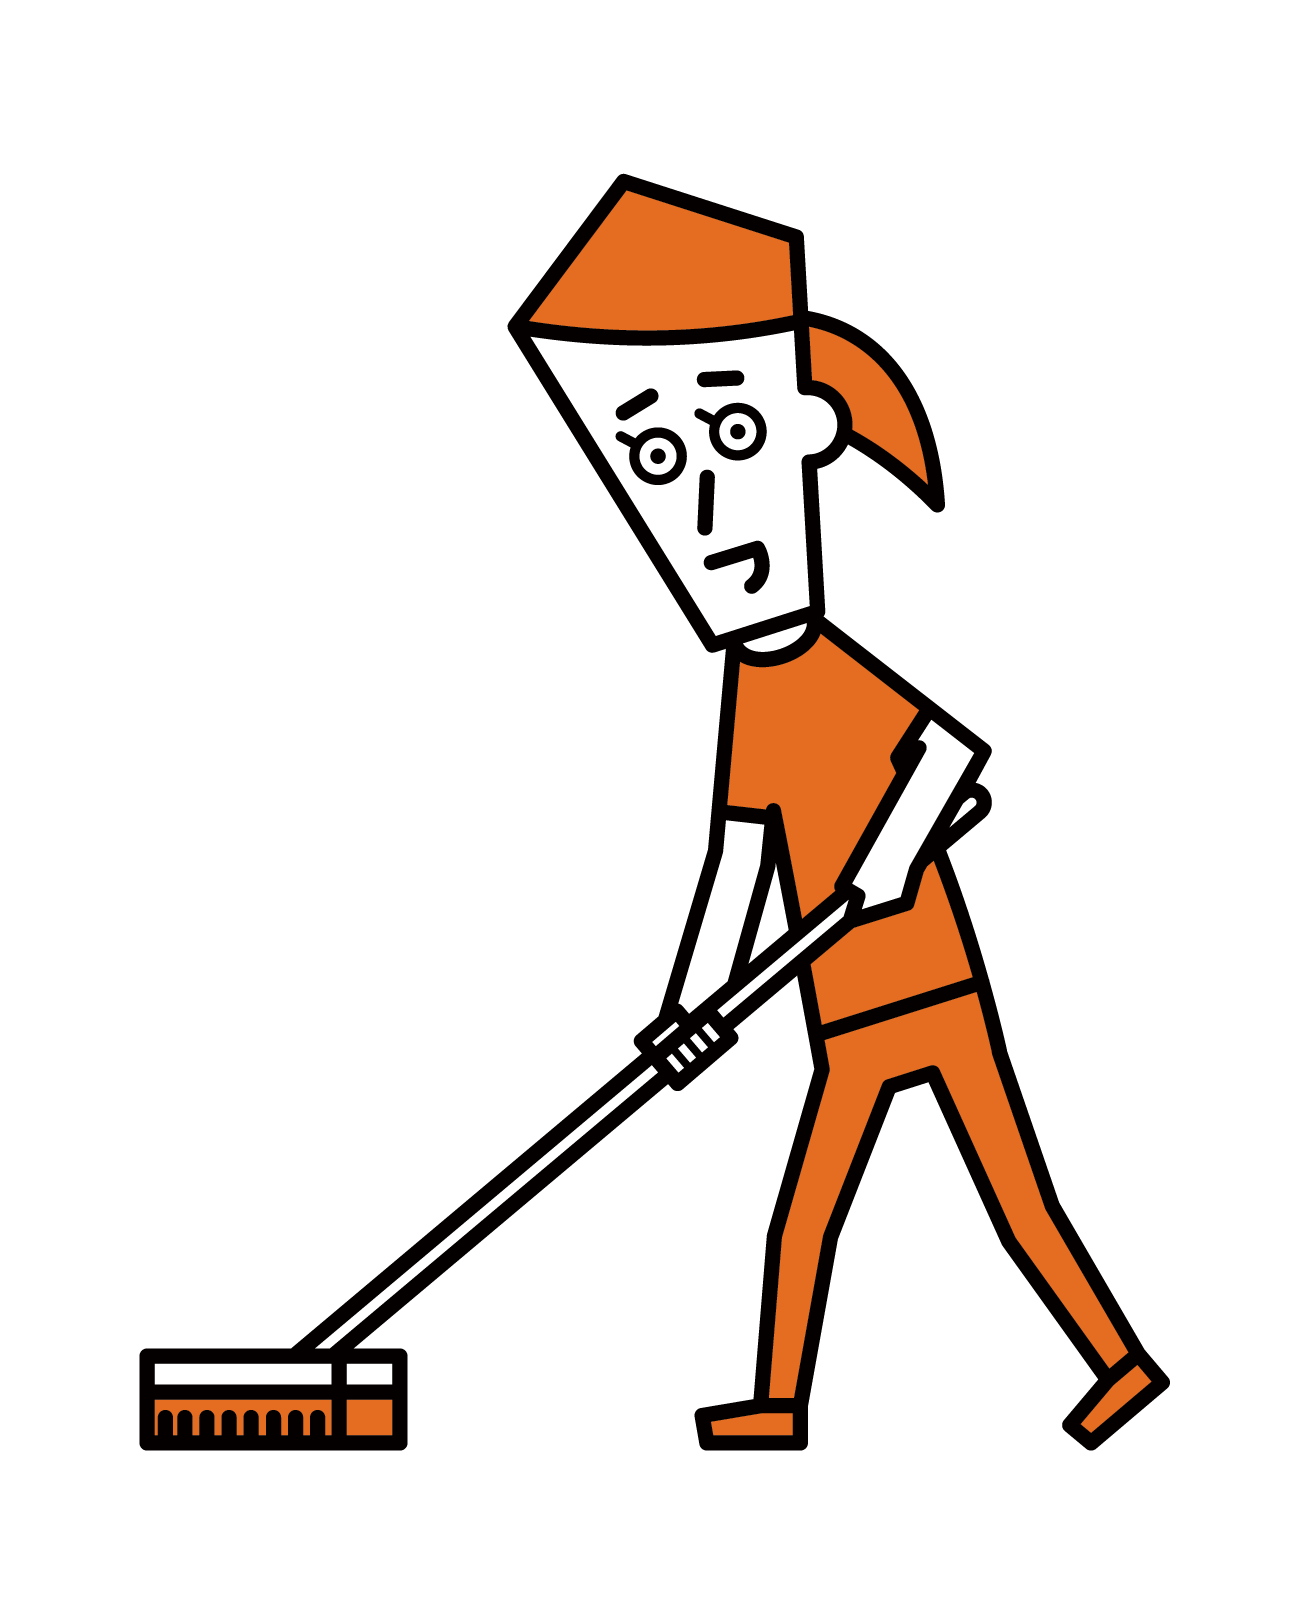 Illustration of a woman cleaning with a brush